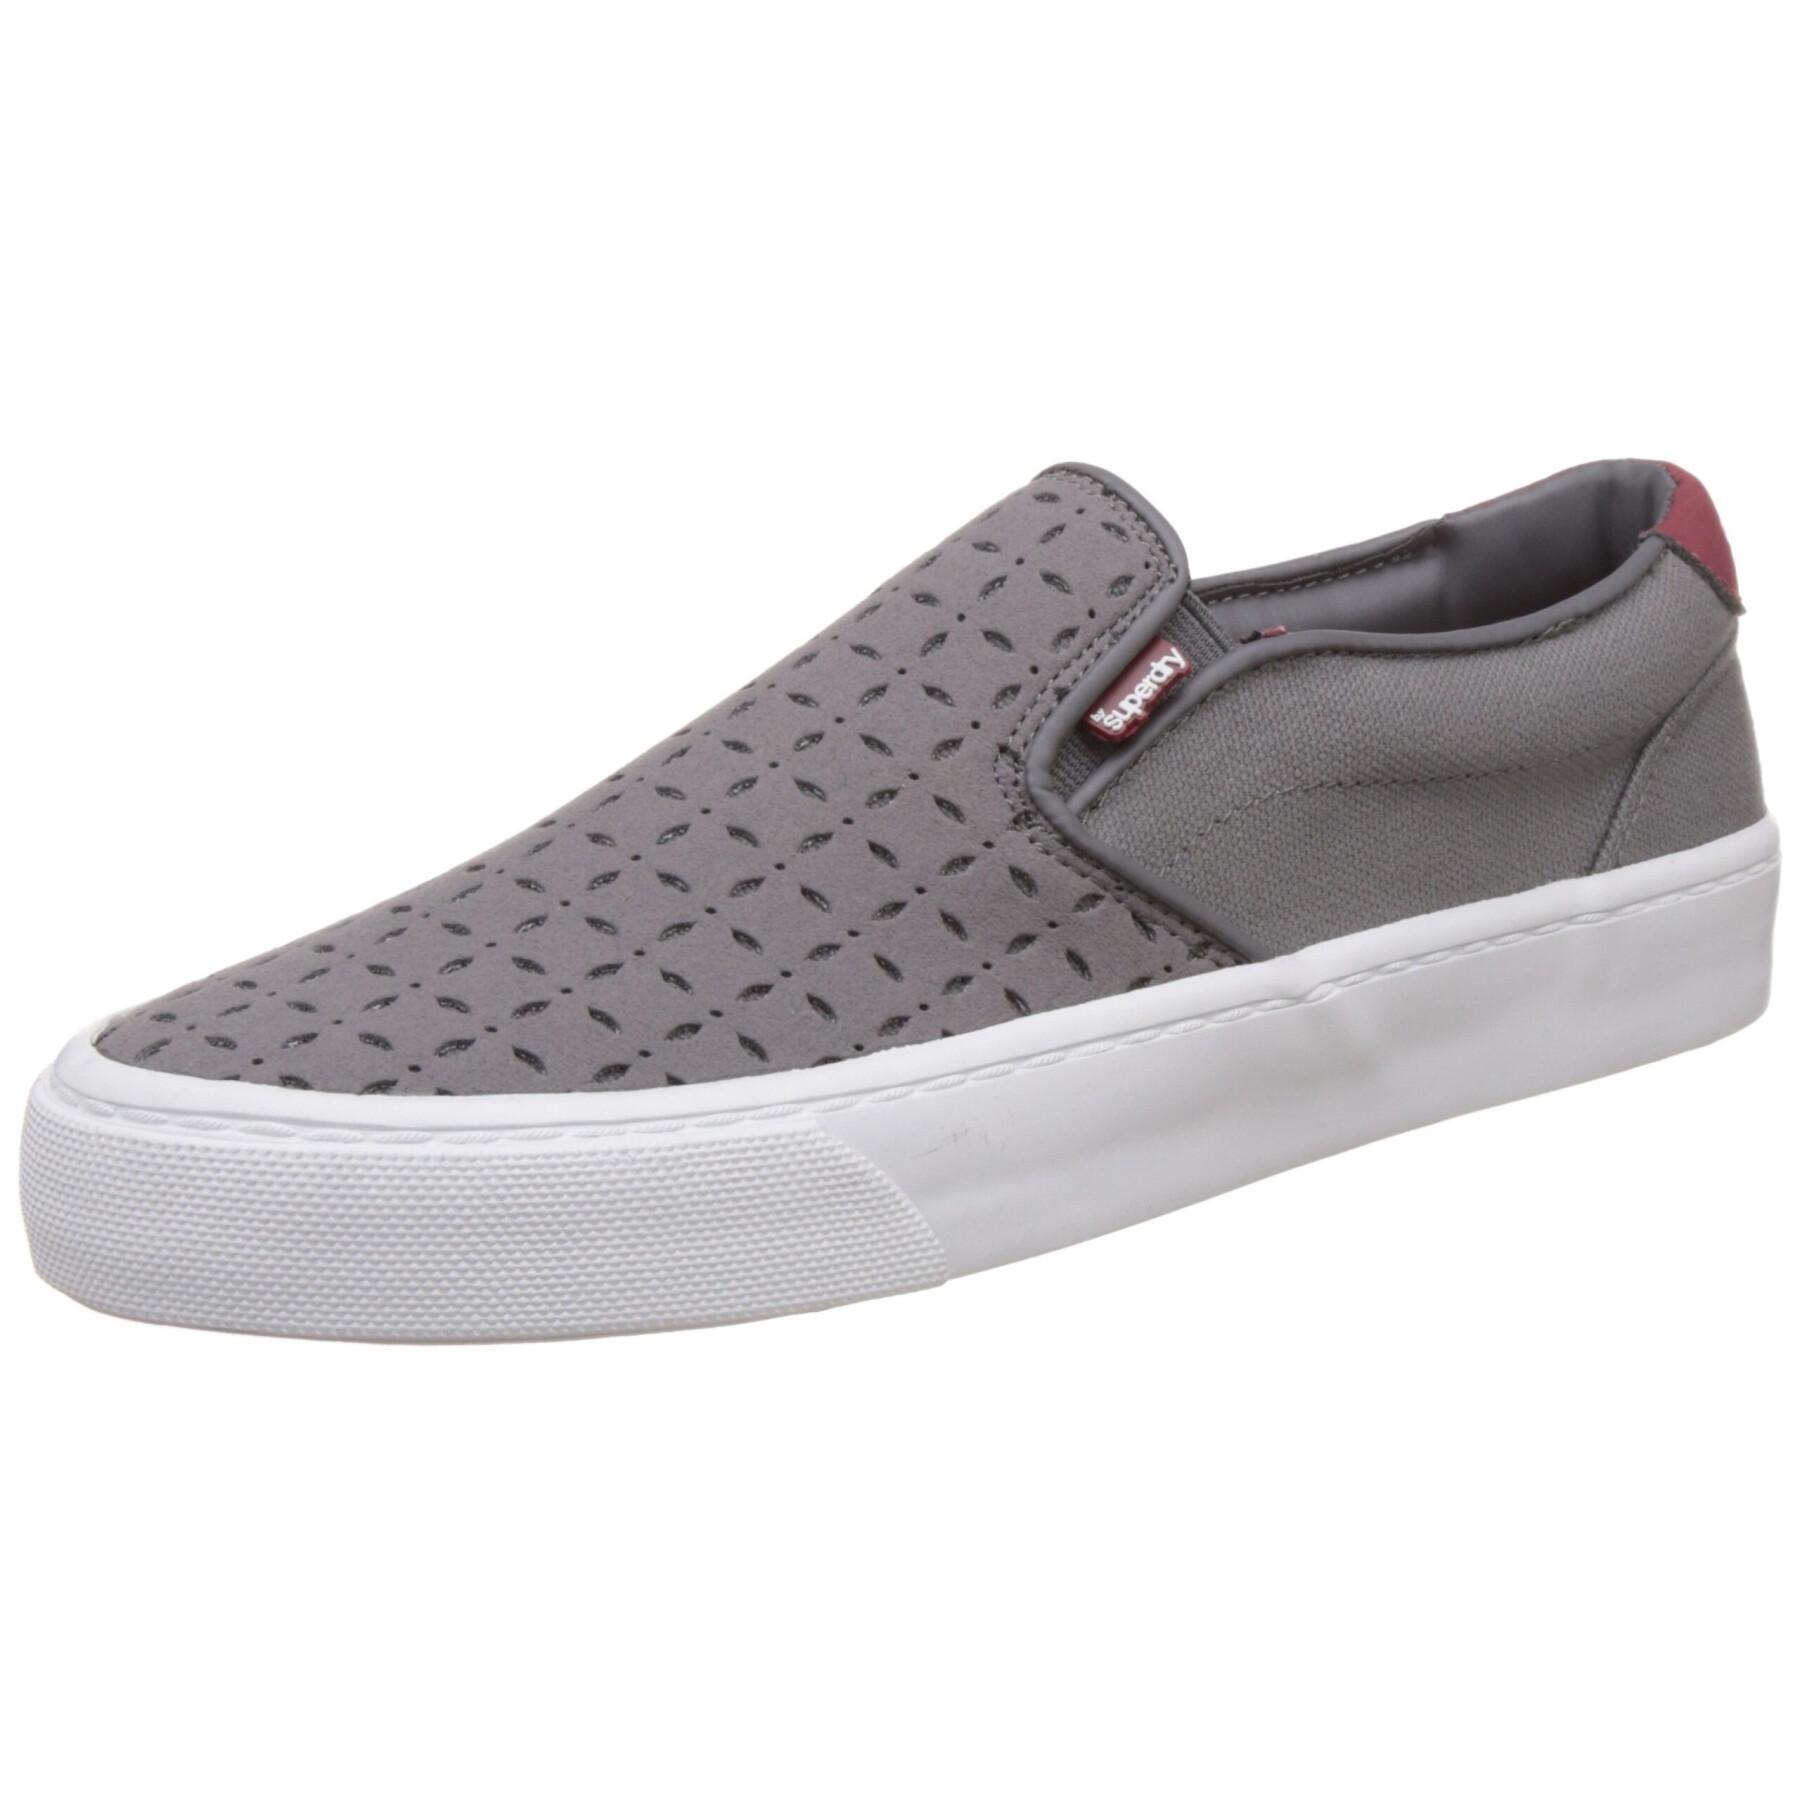 Women's shoes Superdry Dion Slip On